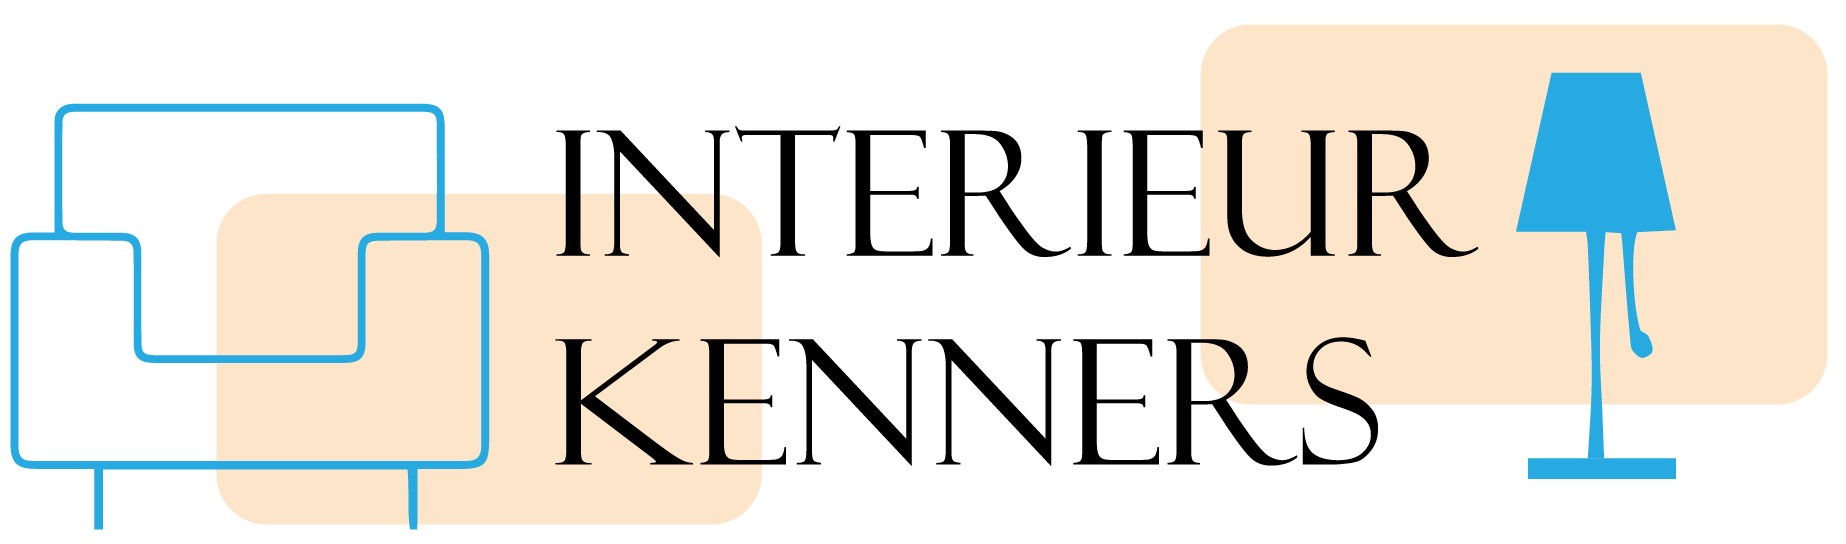 Interieur Kenners